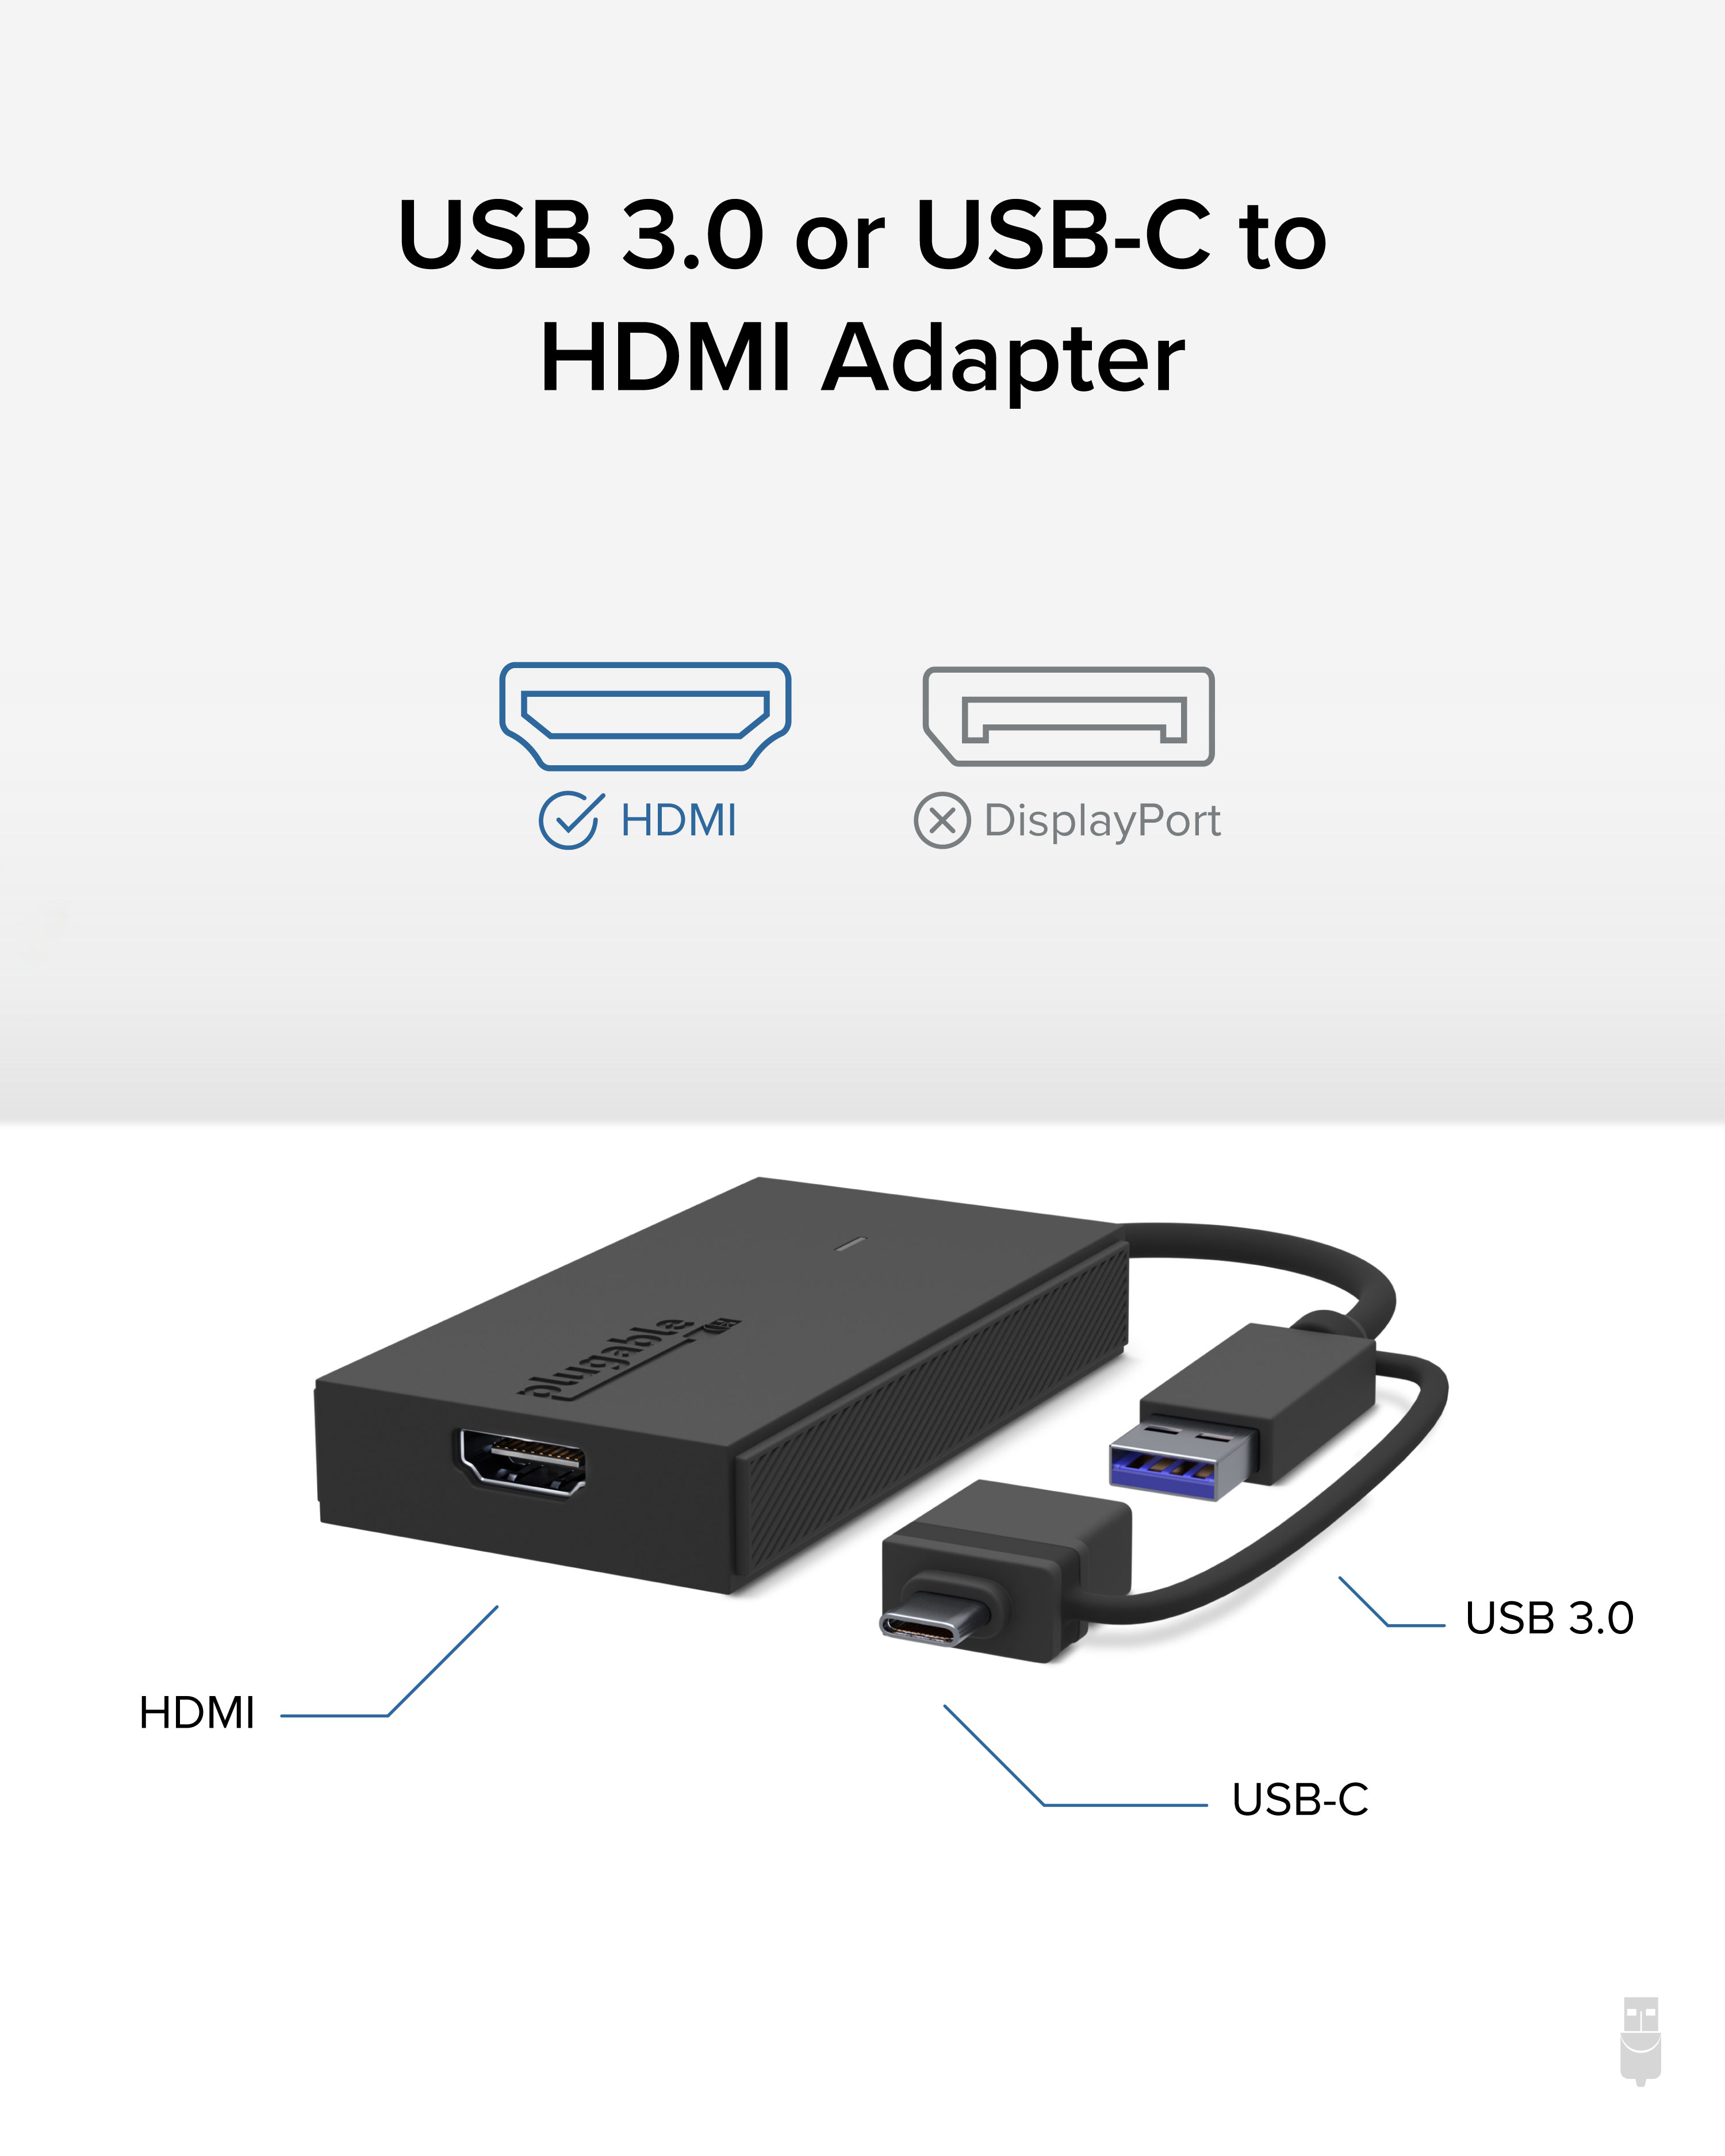 Plugable USB C to HDMI Adapter, Universal Video Graphics Adapter for USB 3.0 and USB-C Macs and Windows, Extend an HDMI Monitor up to 1080p@60Hz - image 3 of 7